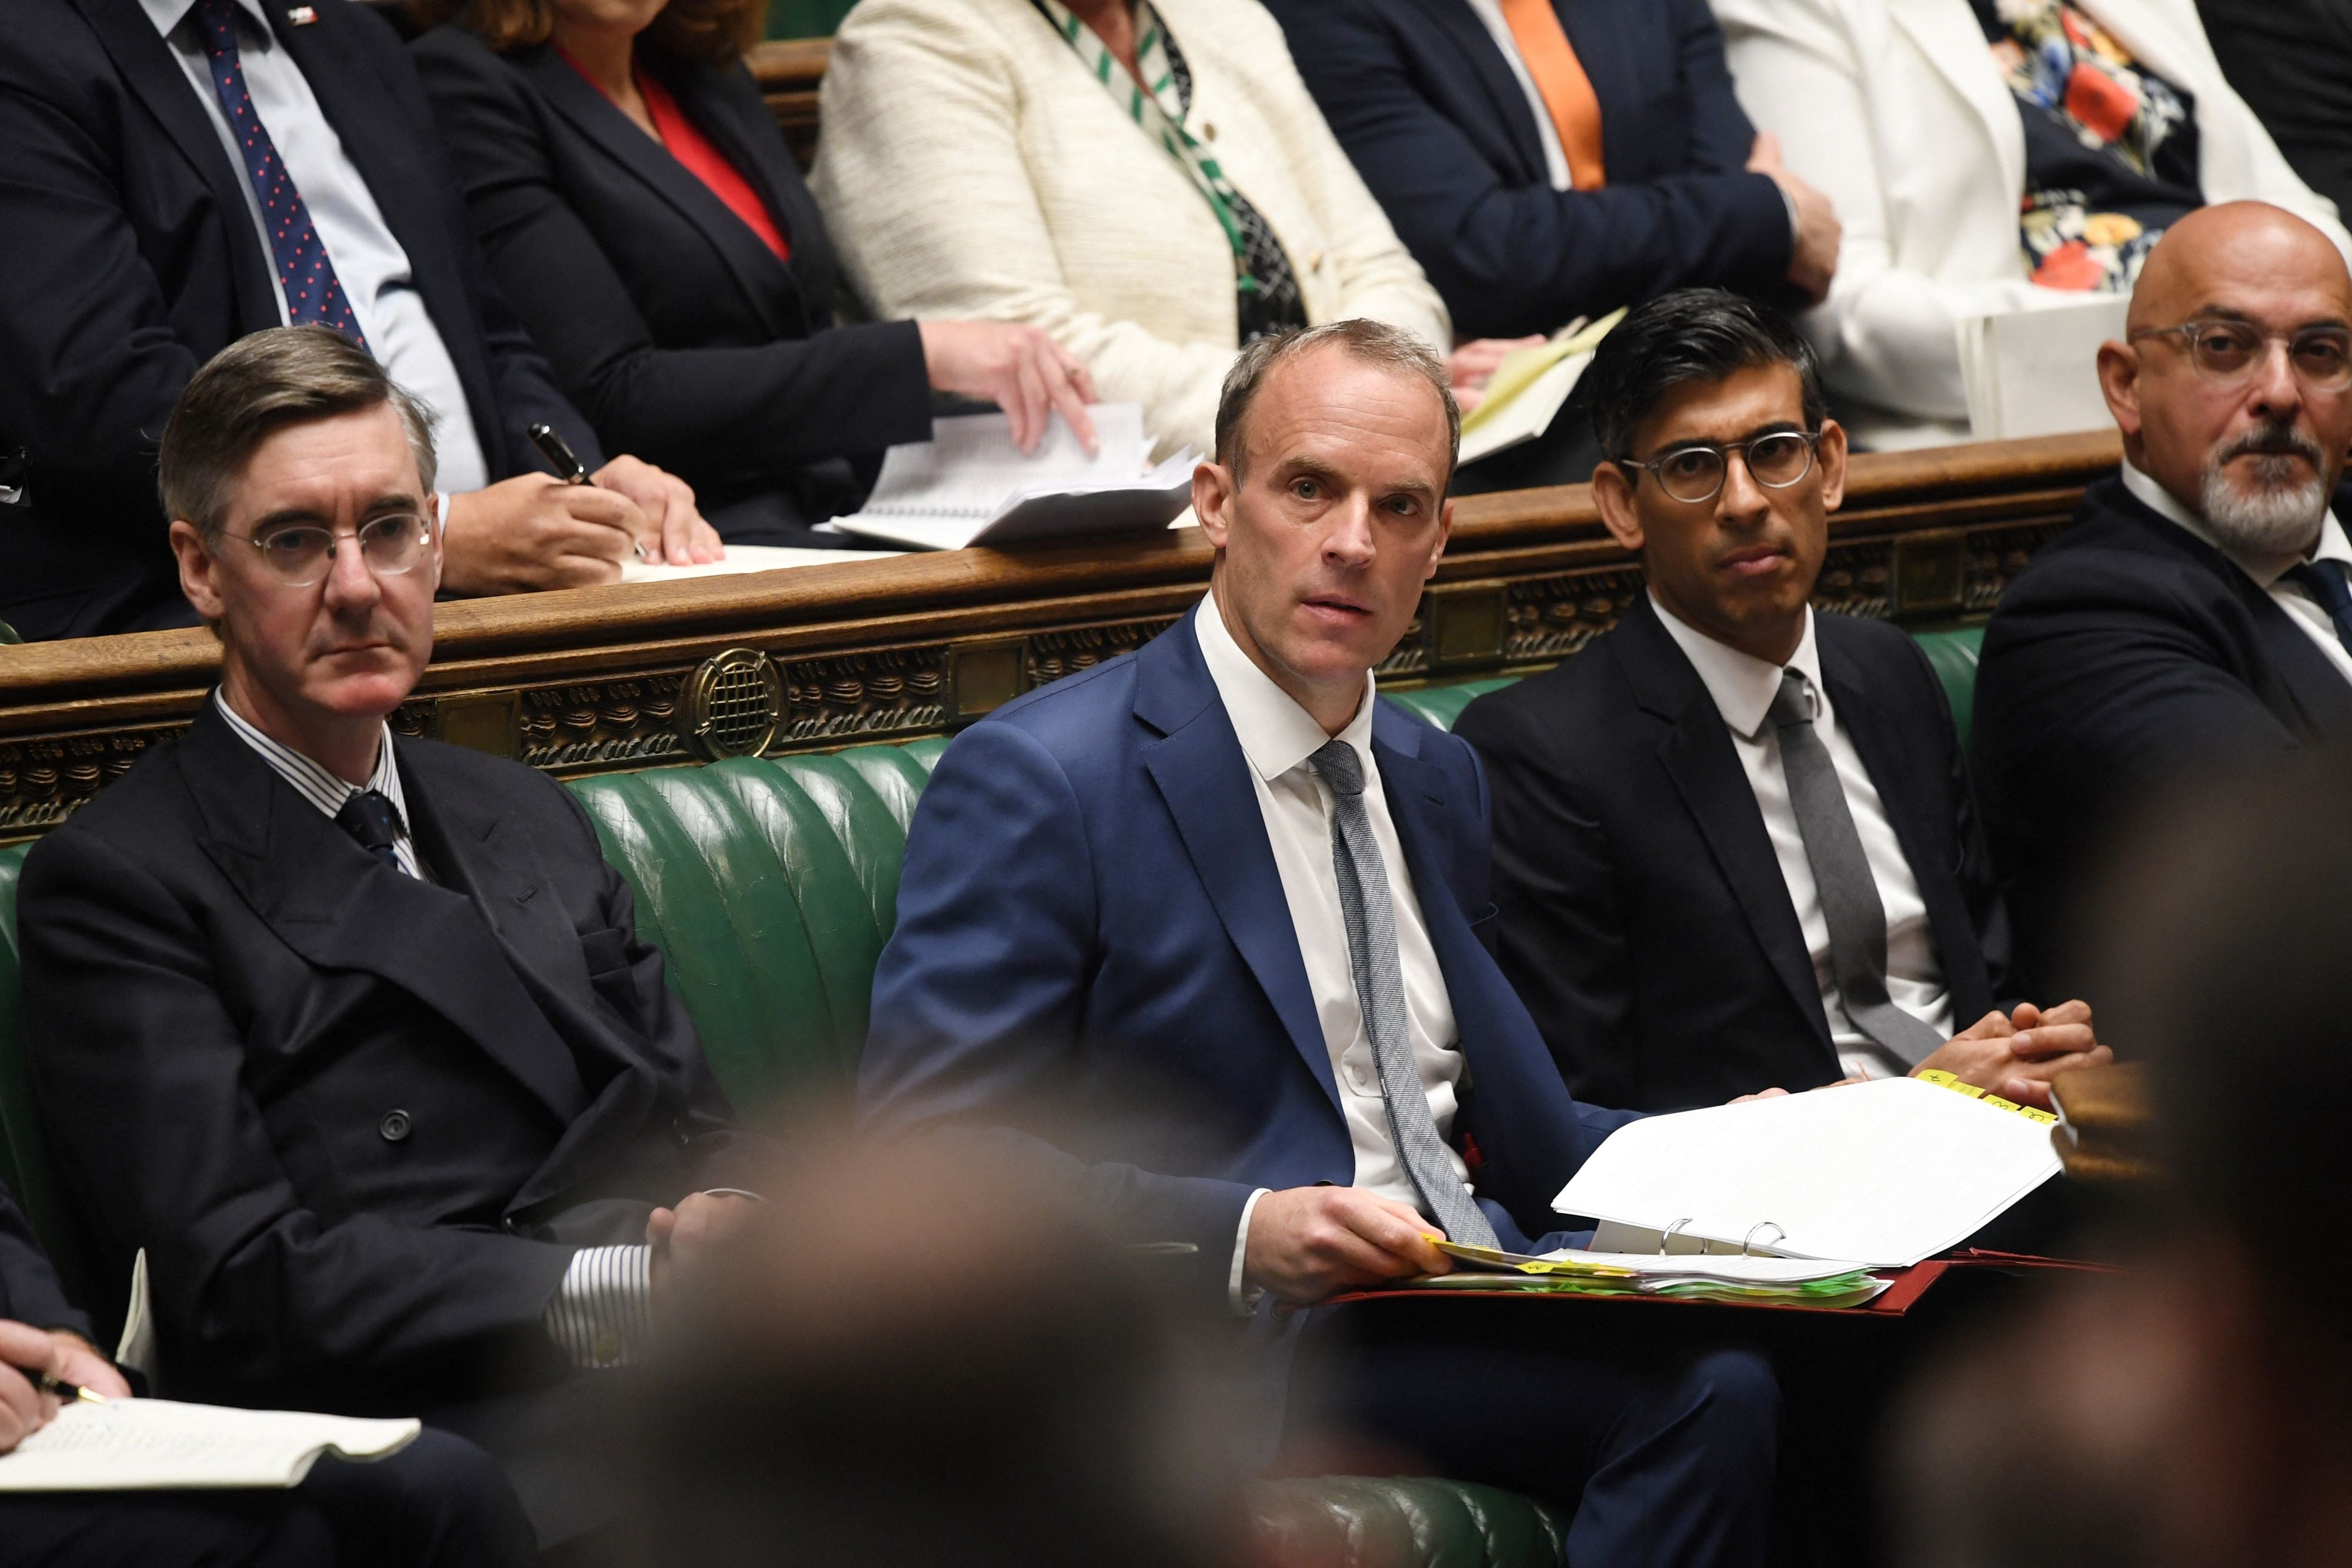 Jacob Rees Mogg [L] and Dominic Raab [C] have both waged war against ‘wokery’ in British culture